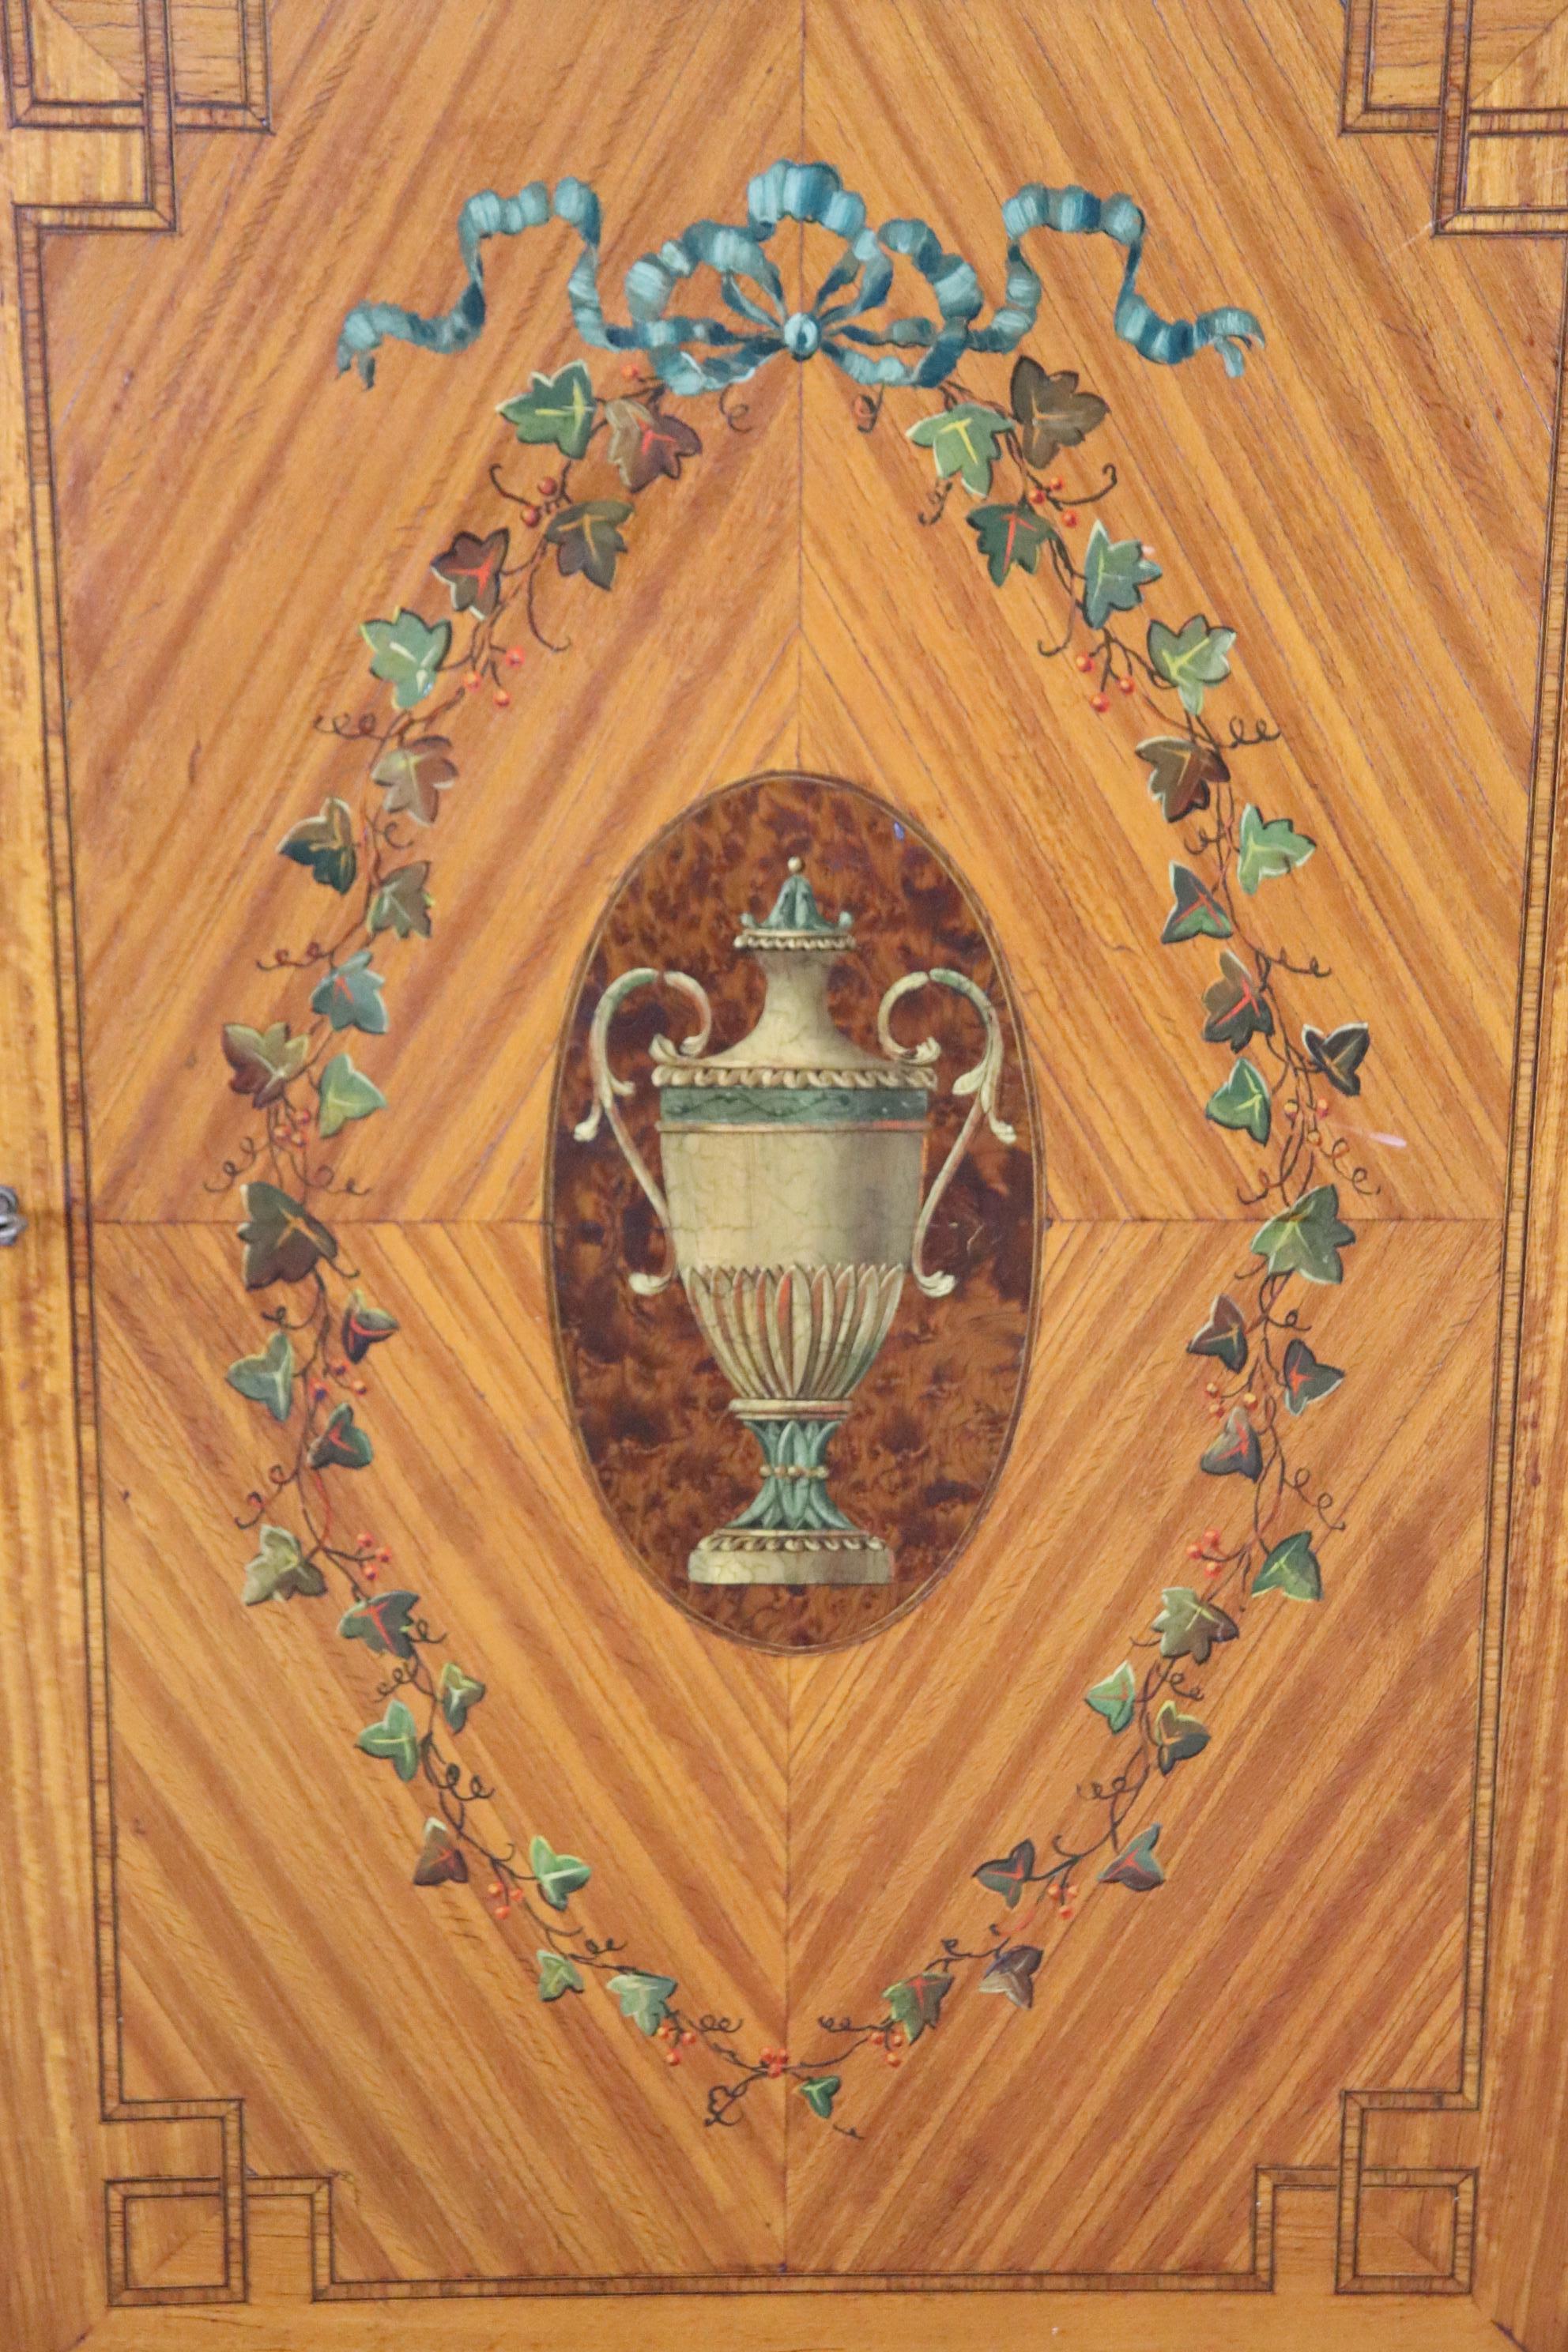 This is a gorgeous cabinet made perhaps in Illinois or Michigan and is of the highest possible quality. Featuring some of the world's most expensive woods, satinwood from Cyprus and Burled walnut from England, this cabinet would have been made for a